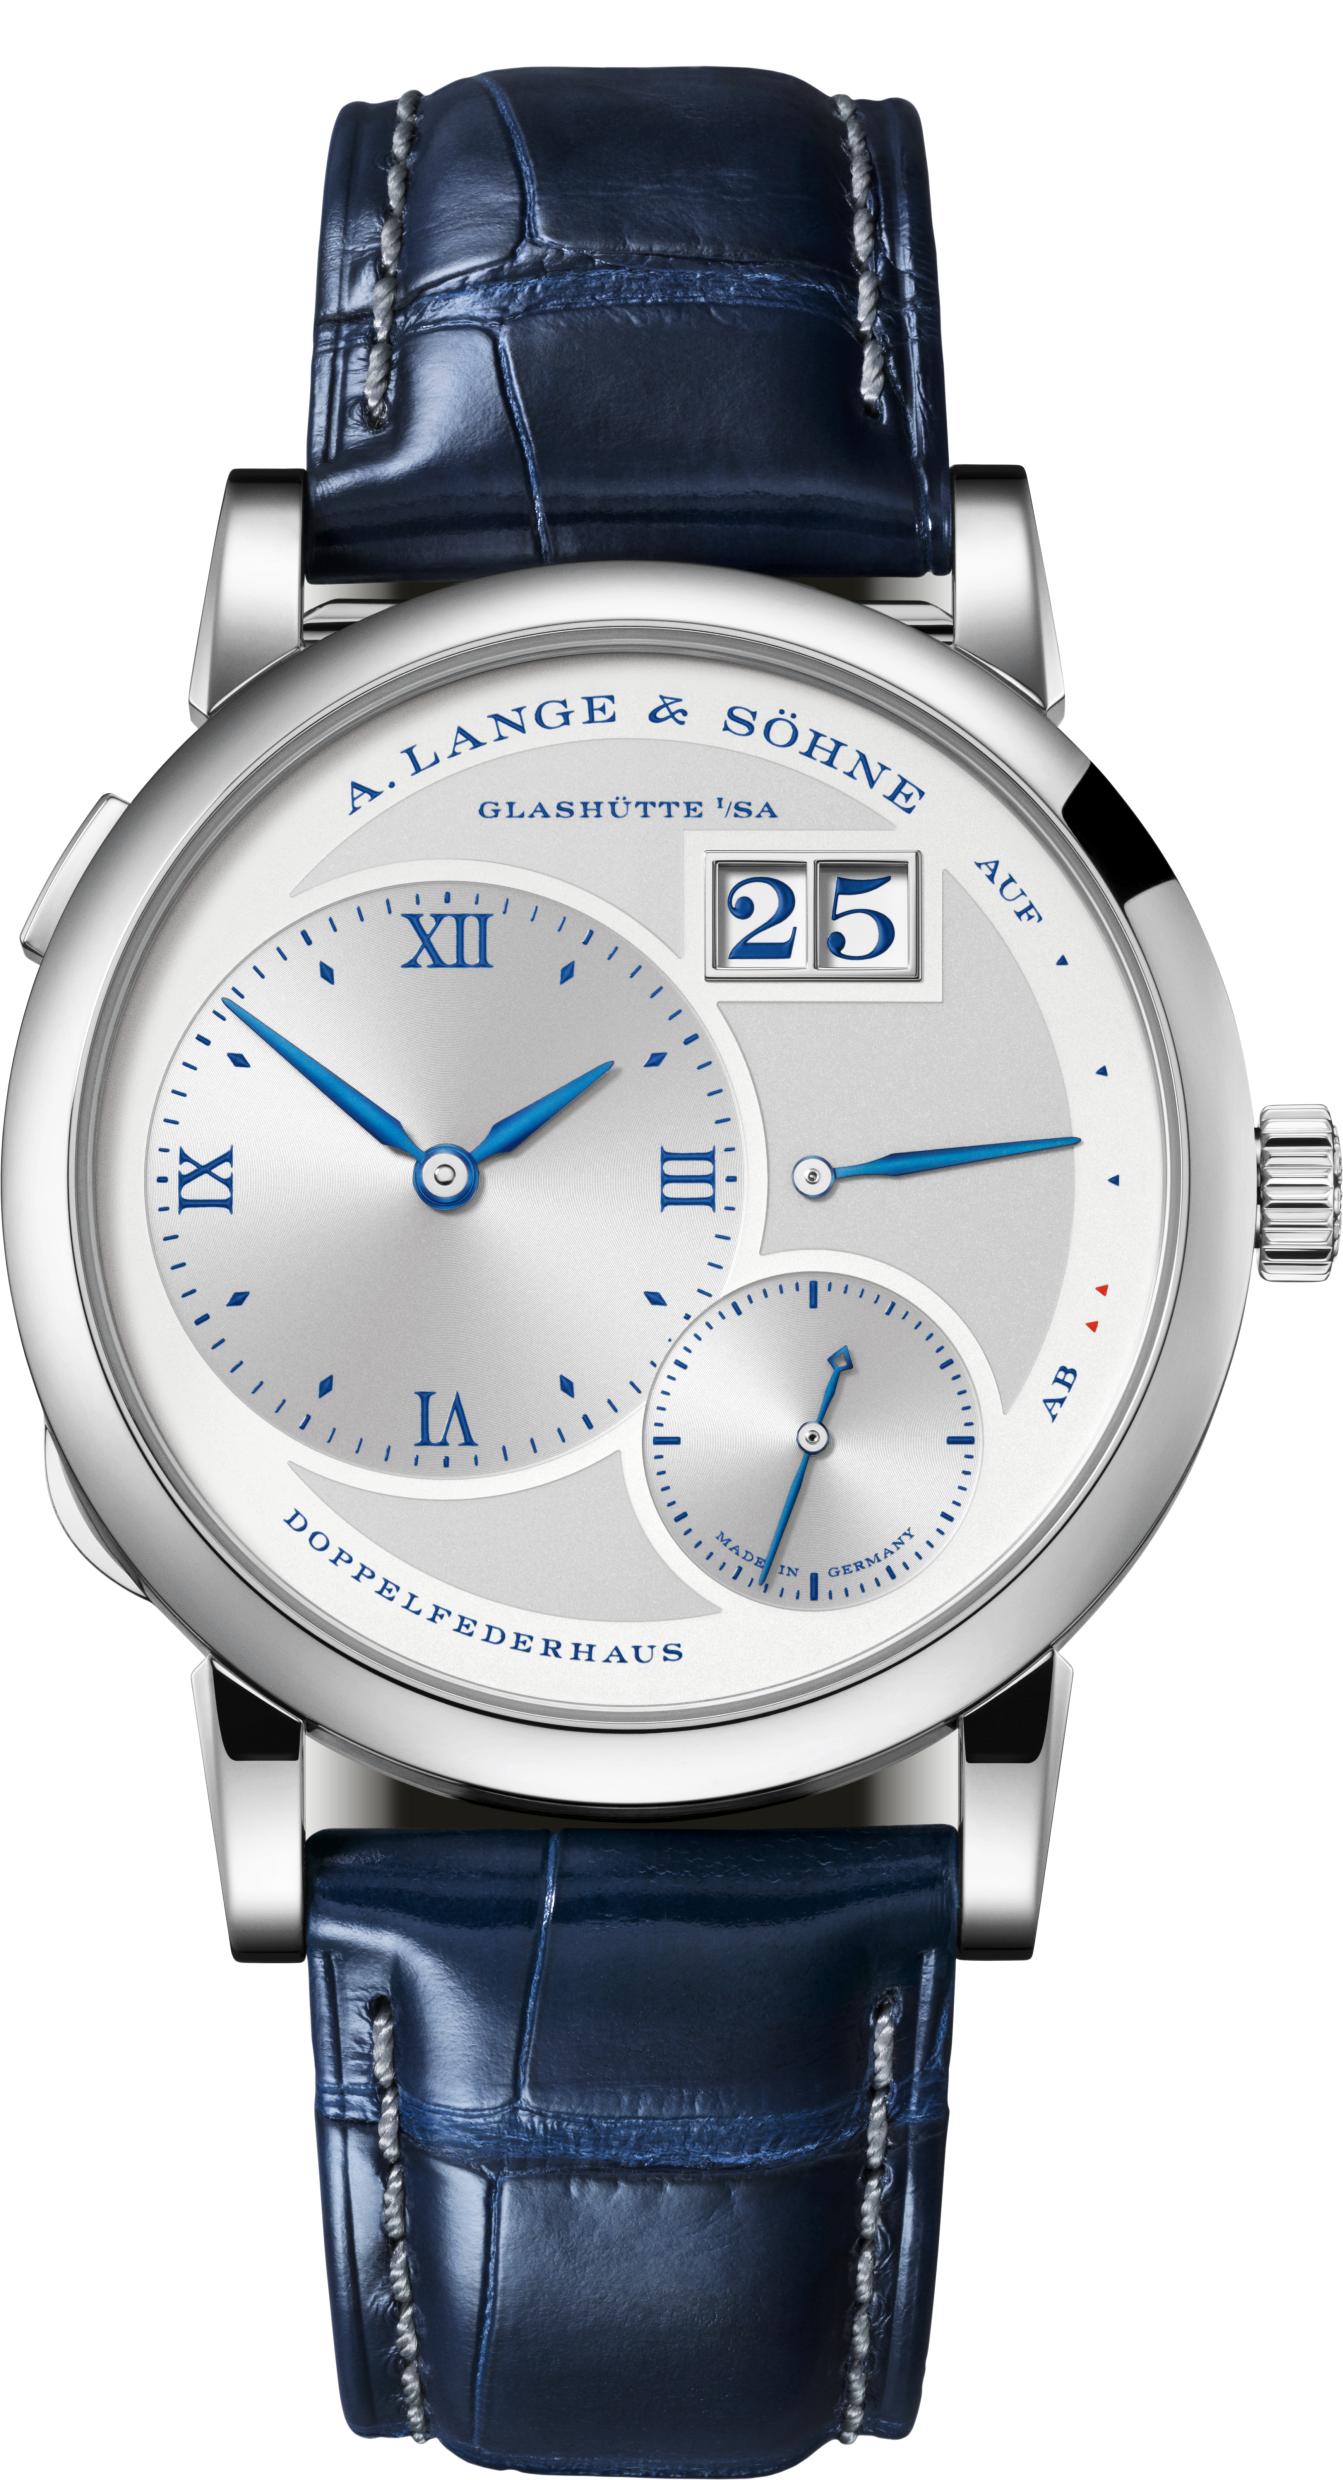 The A. Lange & Sohne Lange 1 25th Anniversary watch